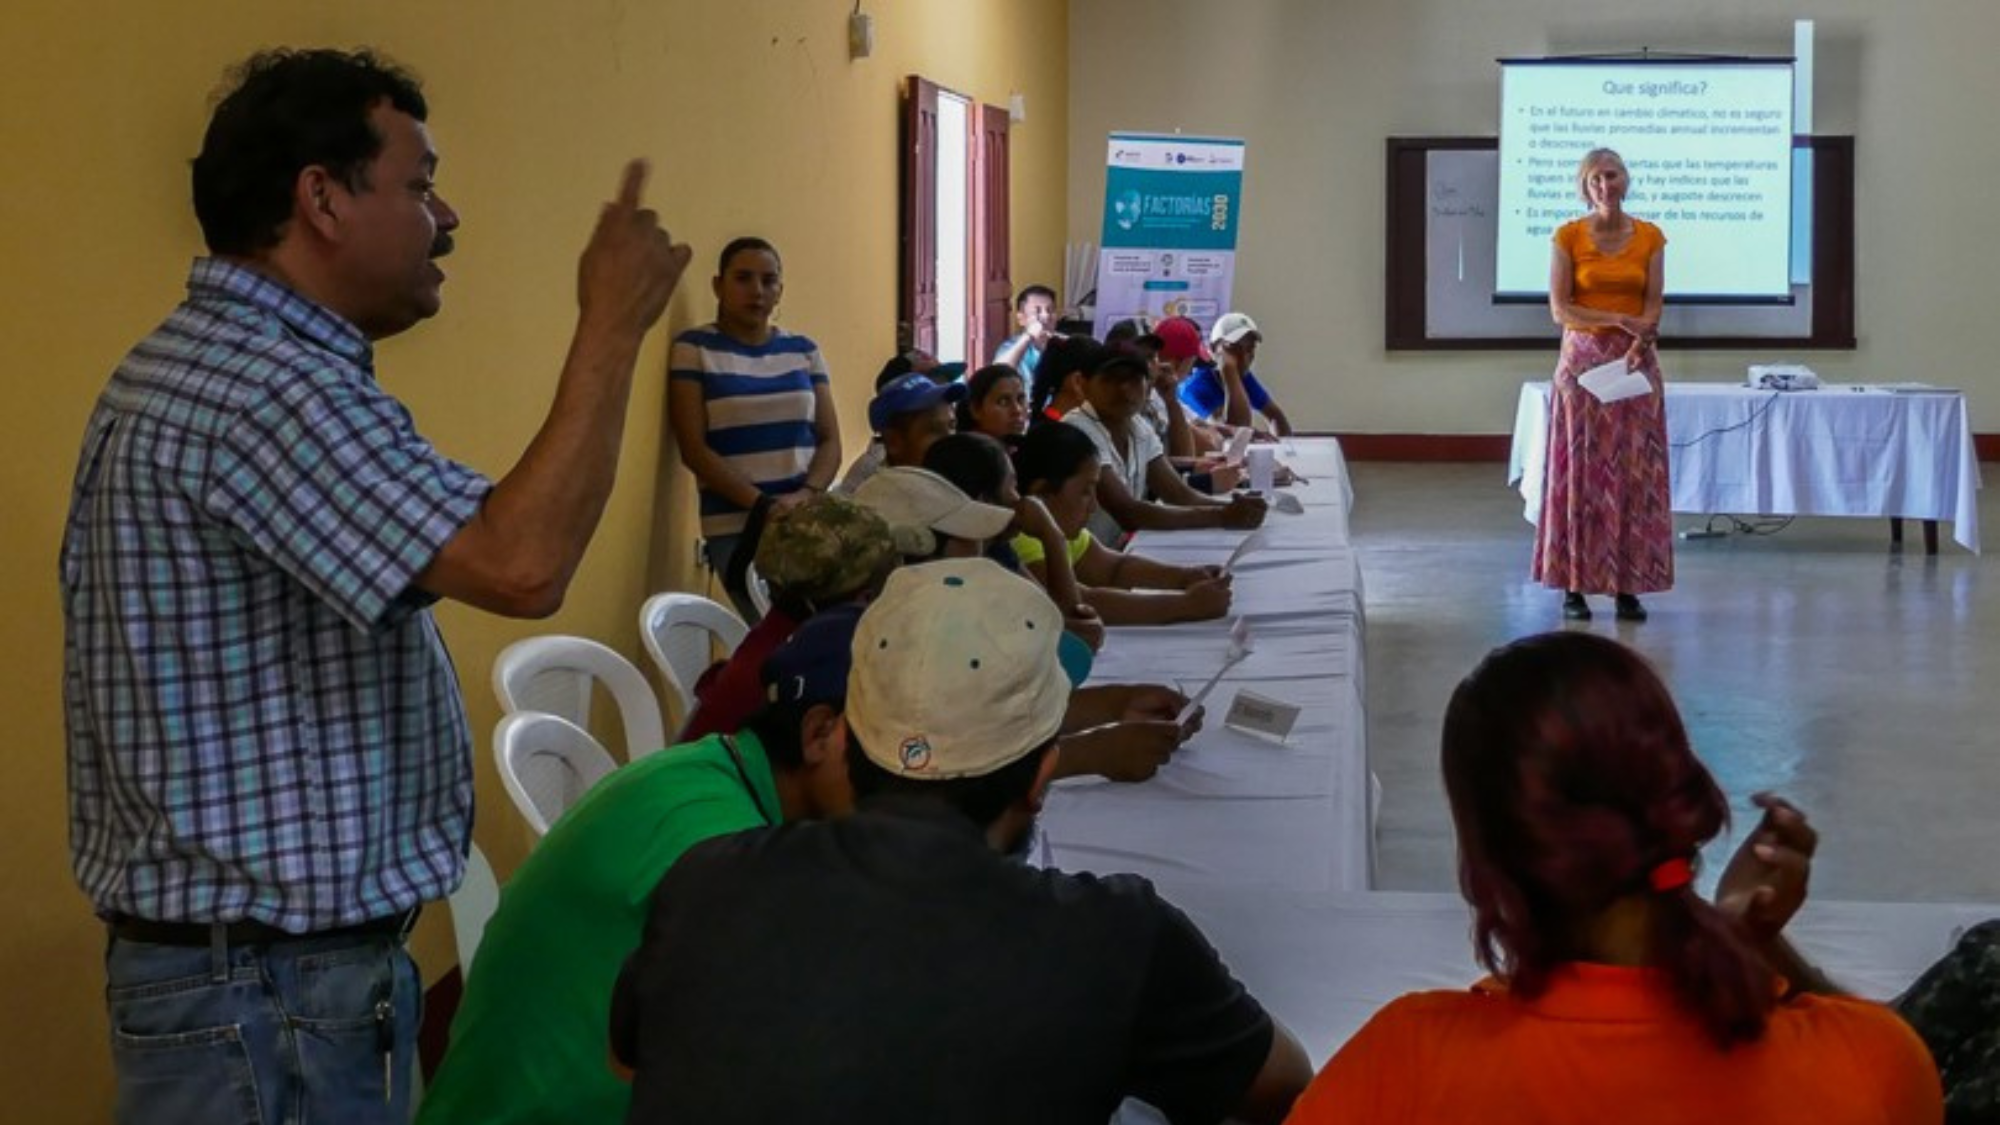 Discussion after the report back on results of climate change analysis. Esteli Workshop, June 2019